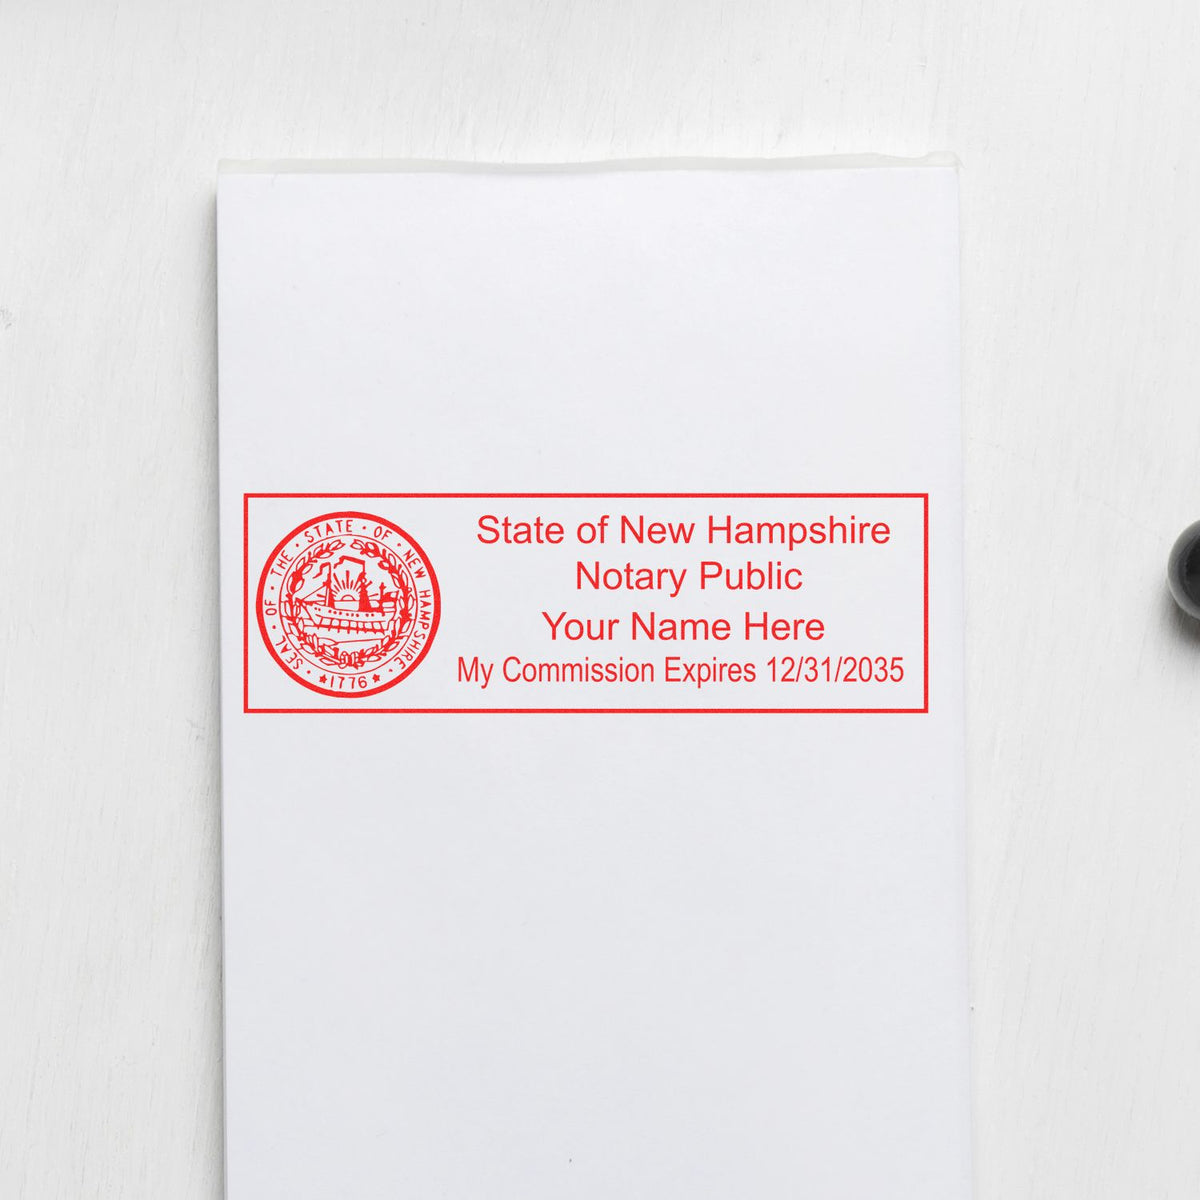 An alternative view of the MaxLight Premium Pre-Inked New Hampshire State Seal Notarial Stamp stamped on a sheet of paper showing the image in use